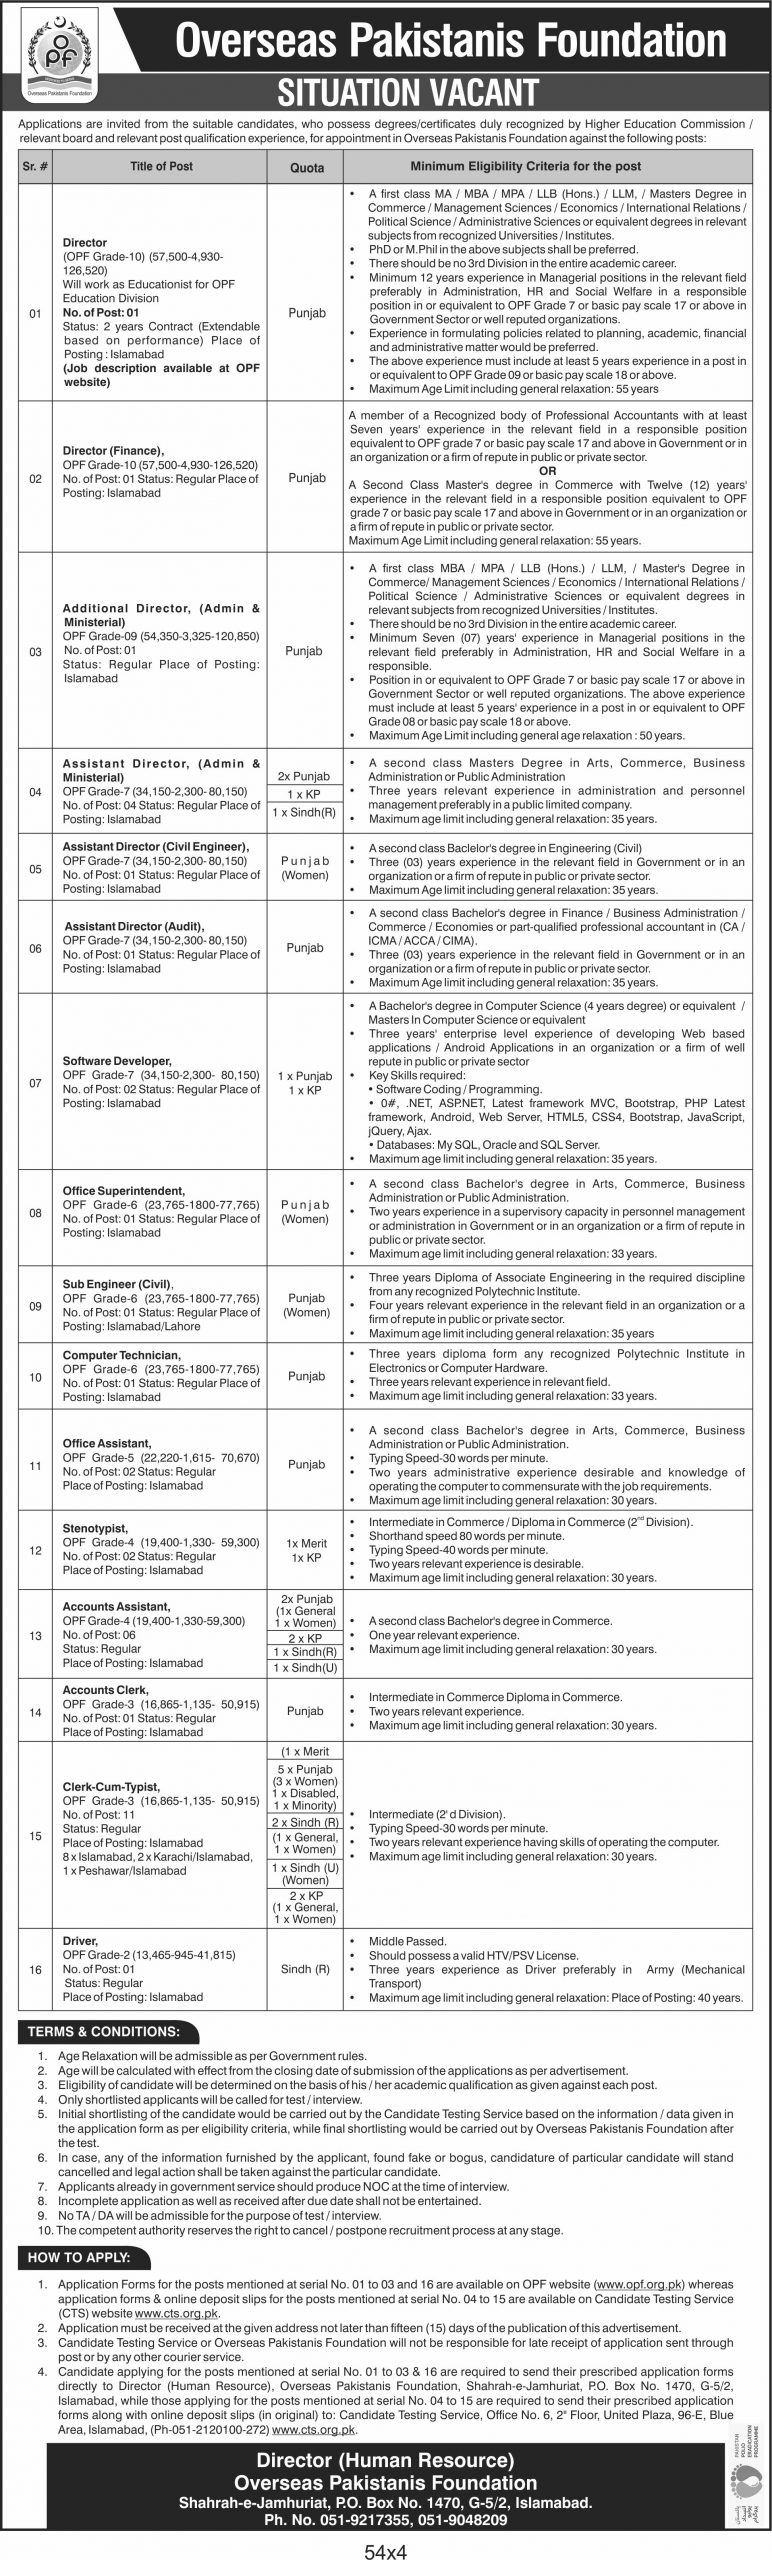 OPF Overseas Pakistanis Foundation CTS Jobs 2021 Application Form Roll No Slip Download Online